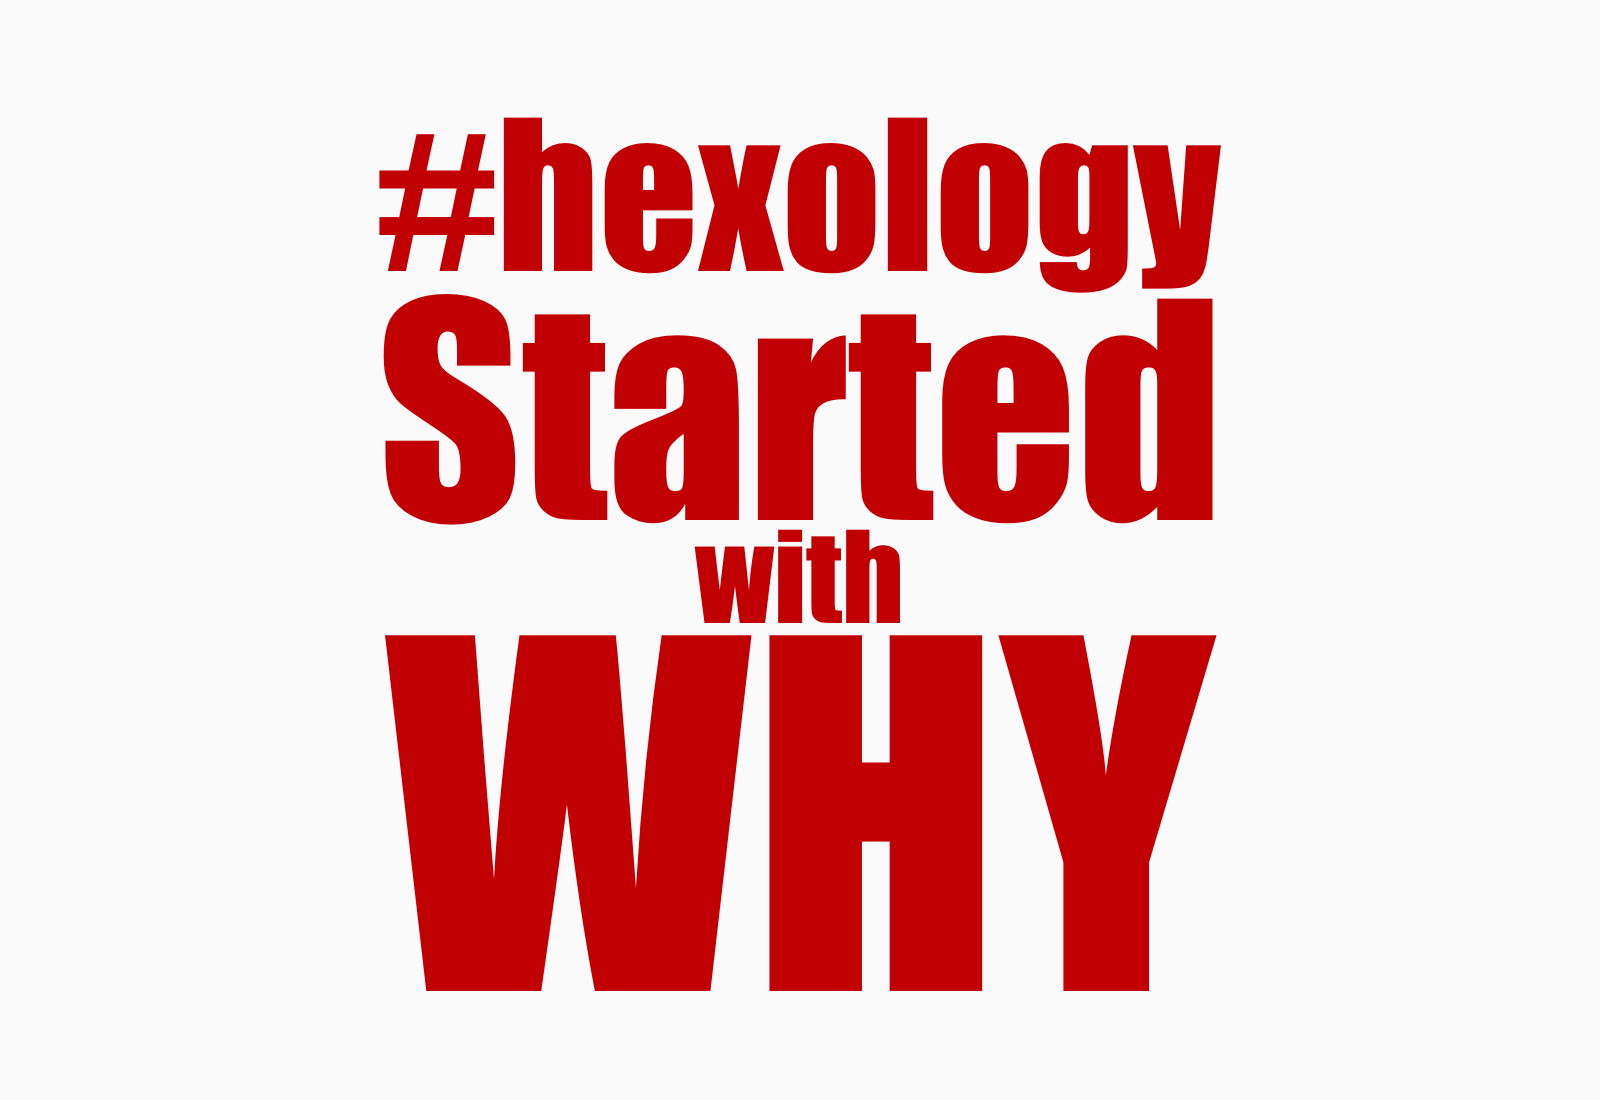 #hexology started with why!